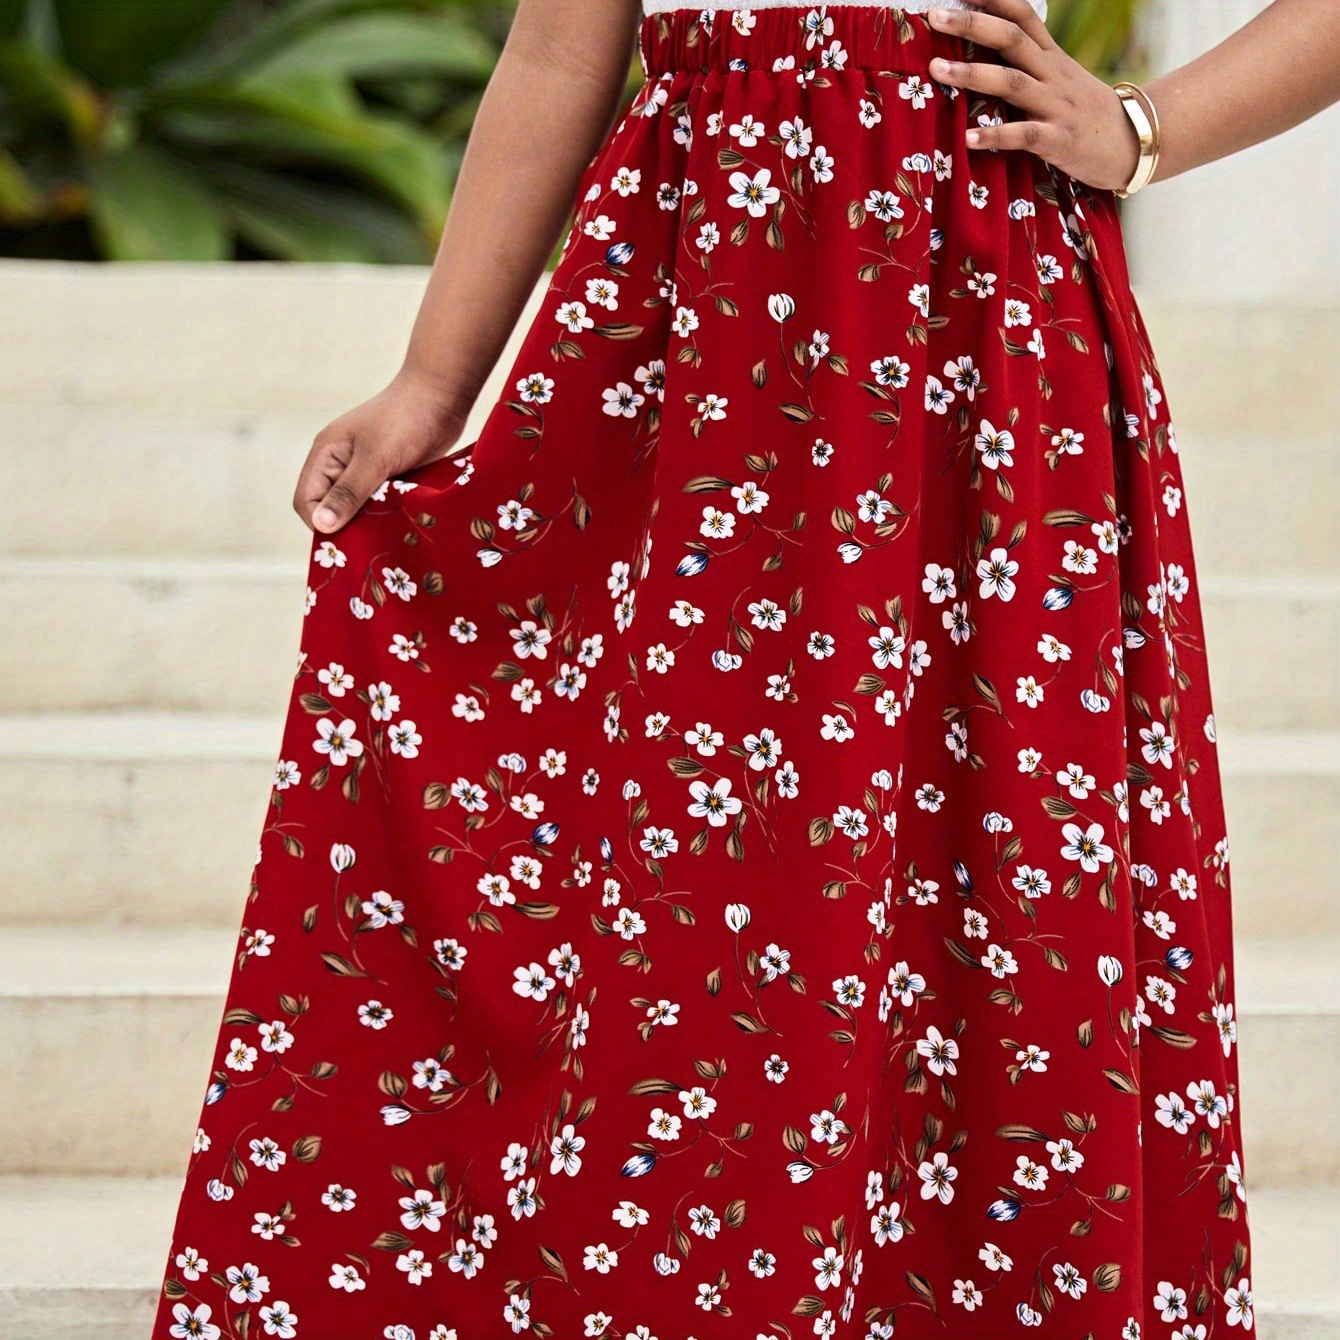 

Girls Bohemian Style Long Skirt, Ditsy Floral Pattern, High-waisted A-line Design, Red, Summer Boho Fashion, For Spring/summer/autumn